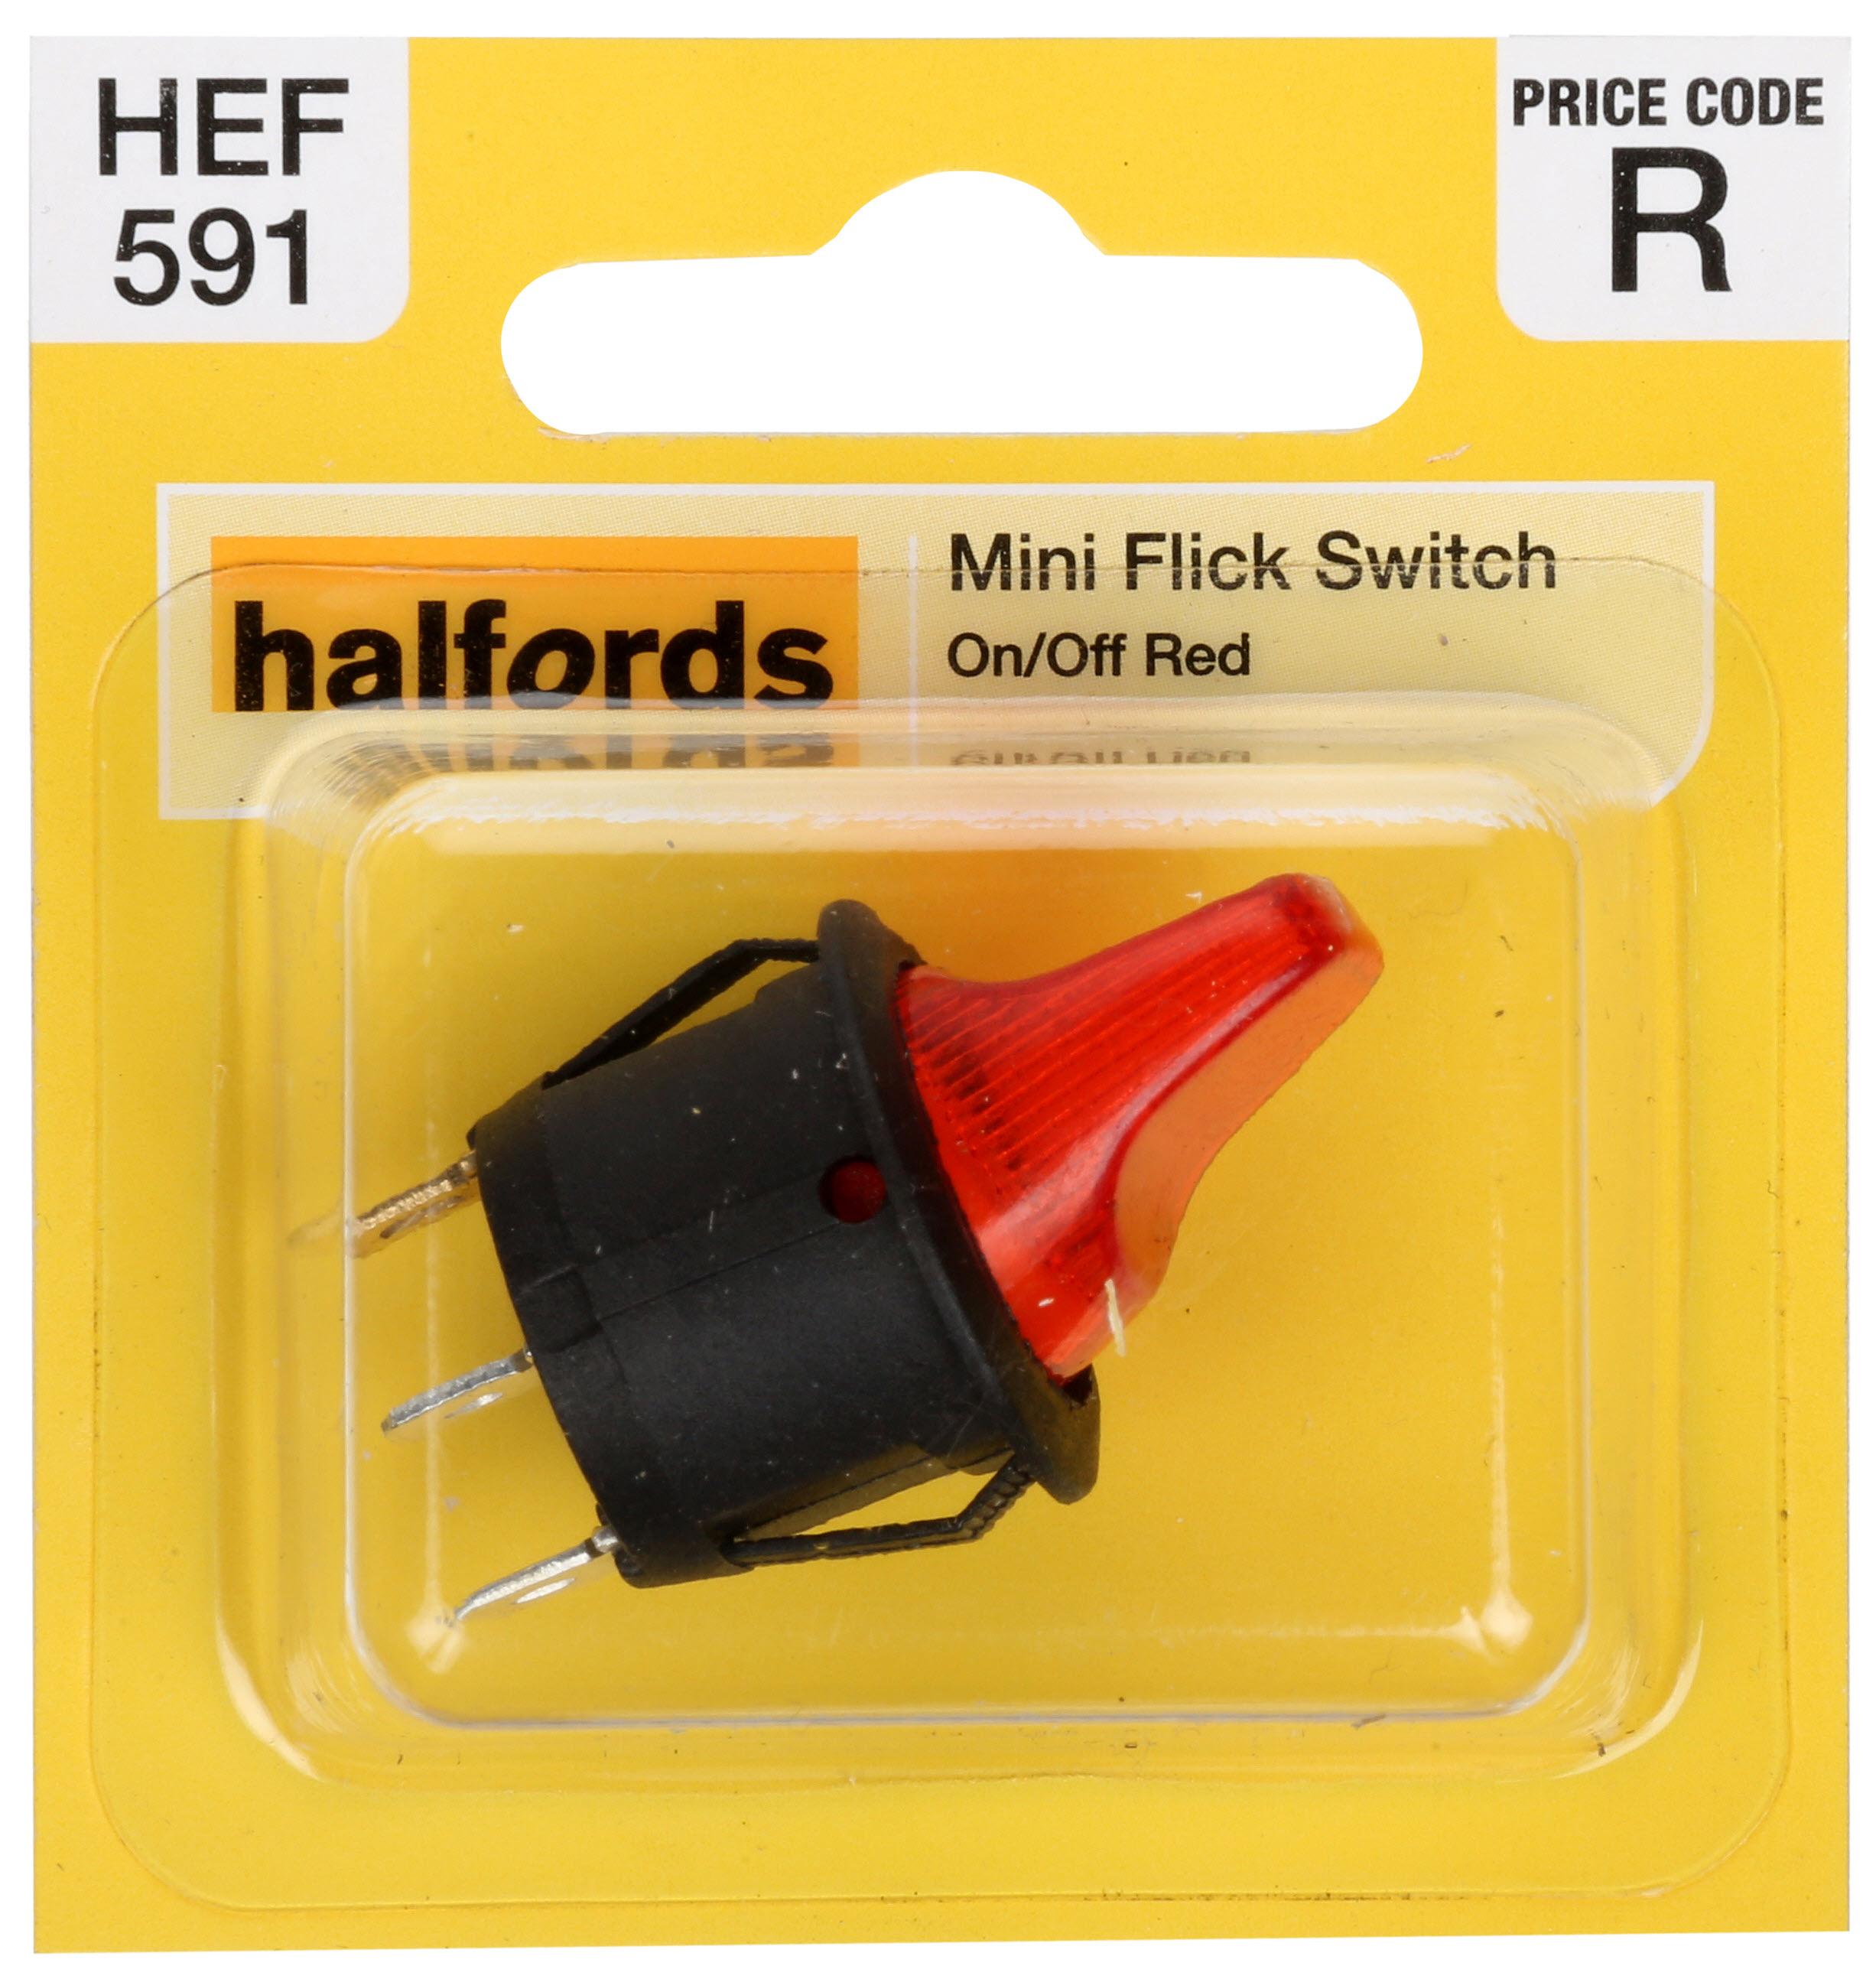 Halfords Mini Flick Switch On/Off Illuminated Red (Hef591)